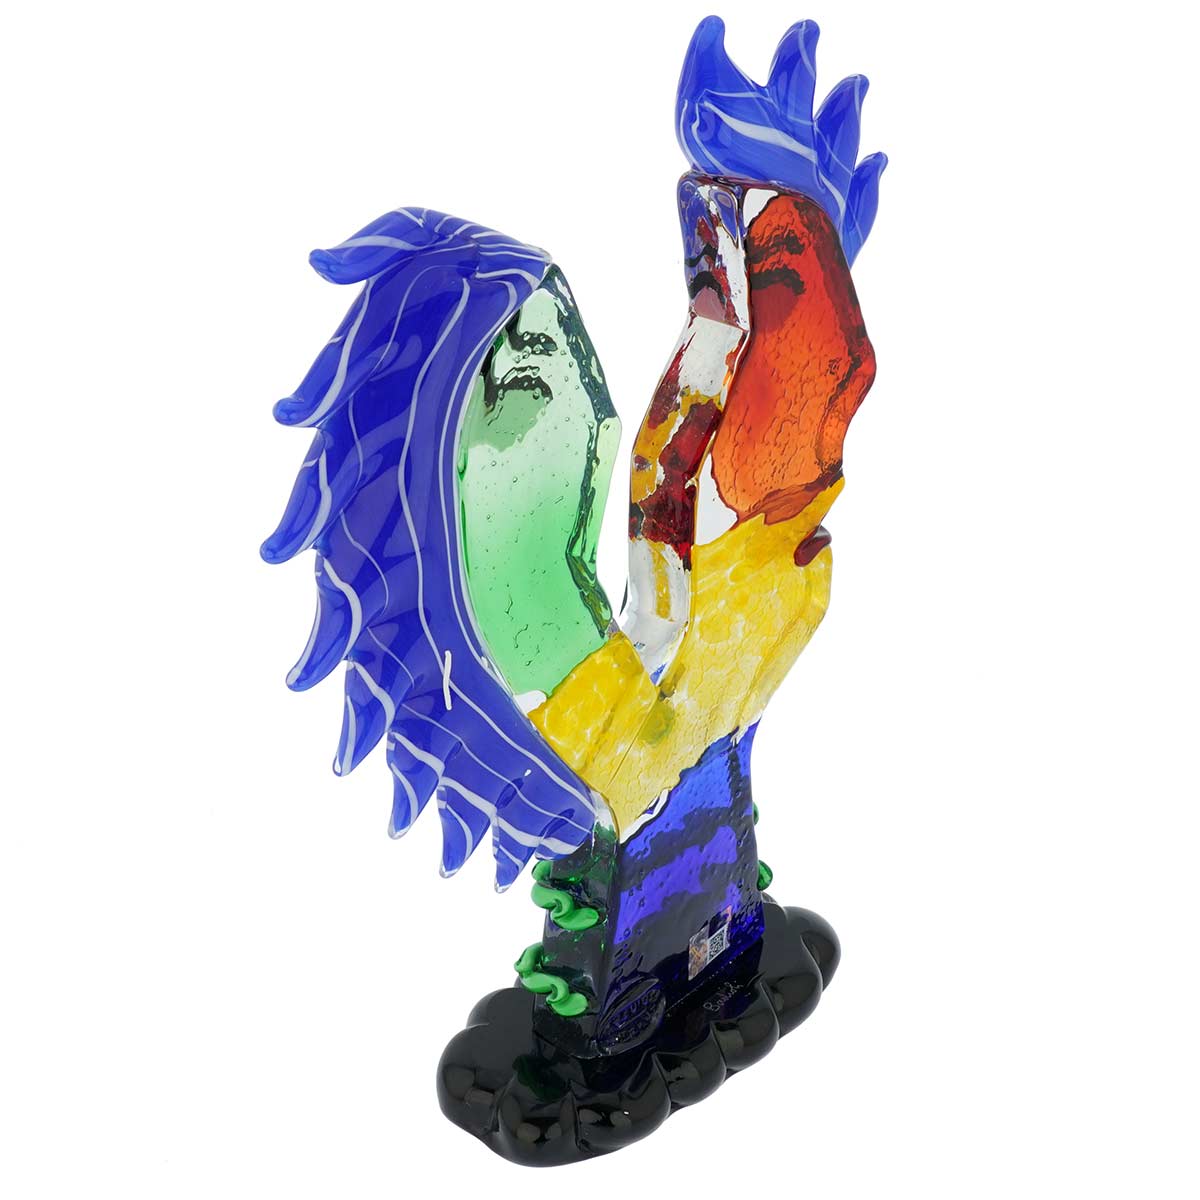 Murano Glass Picasso Head In Two Parts With Blue Hair